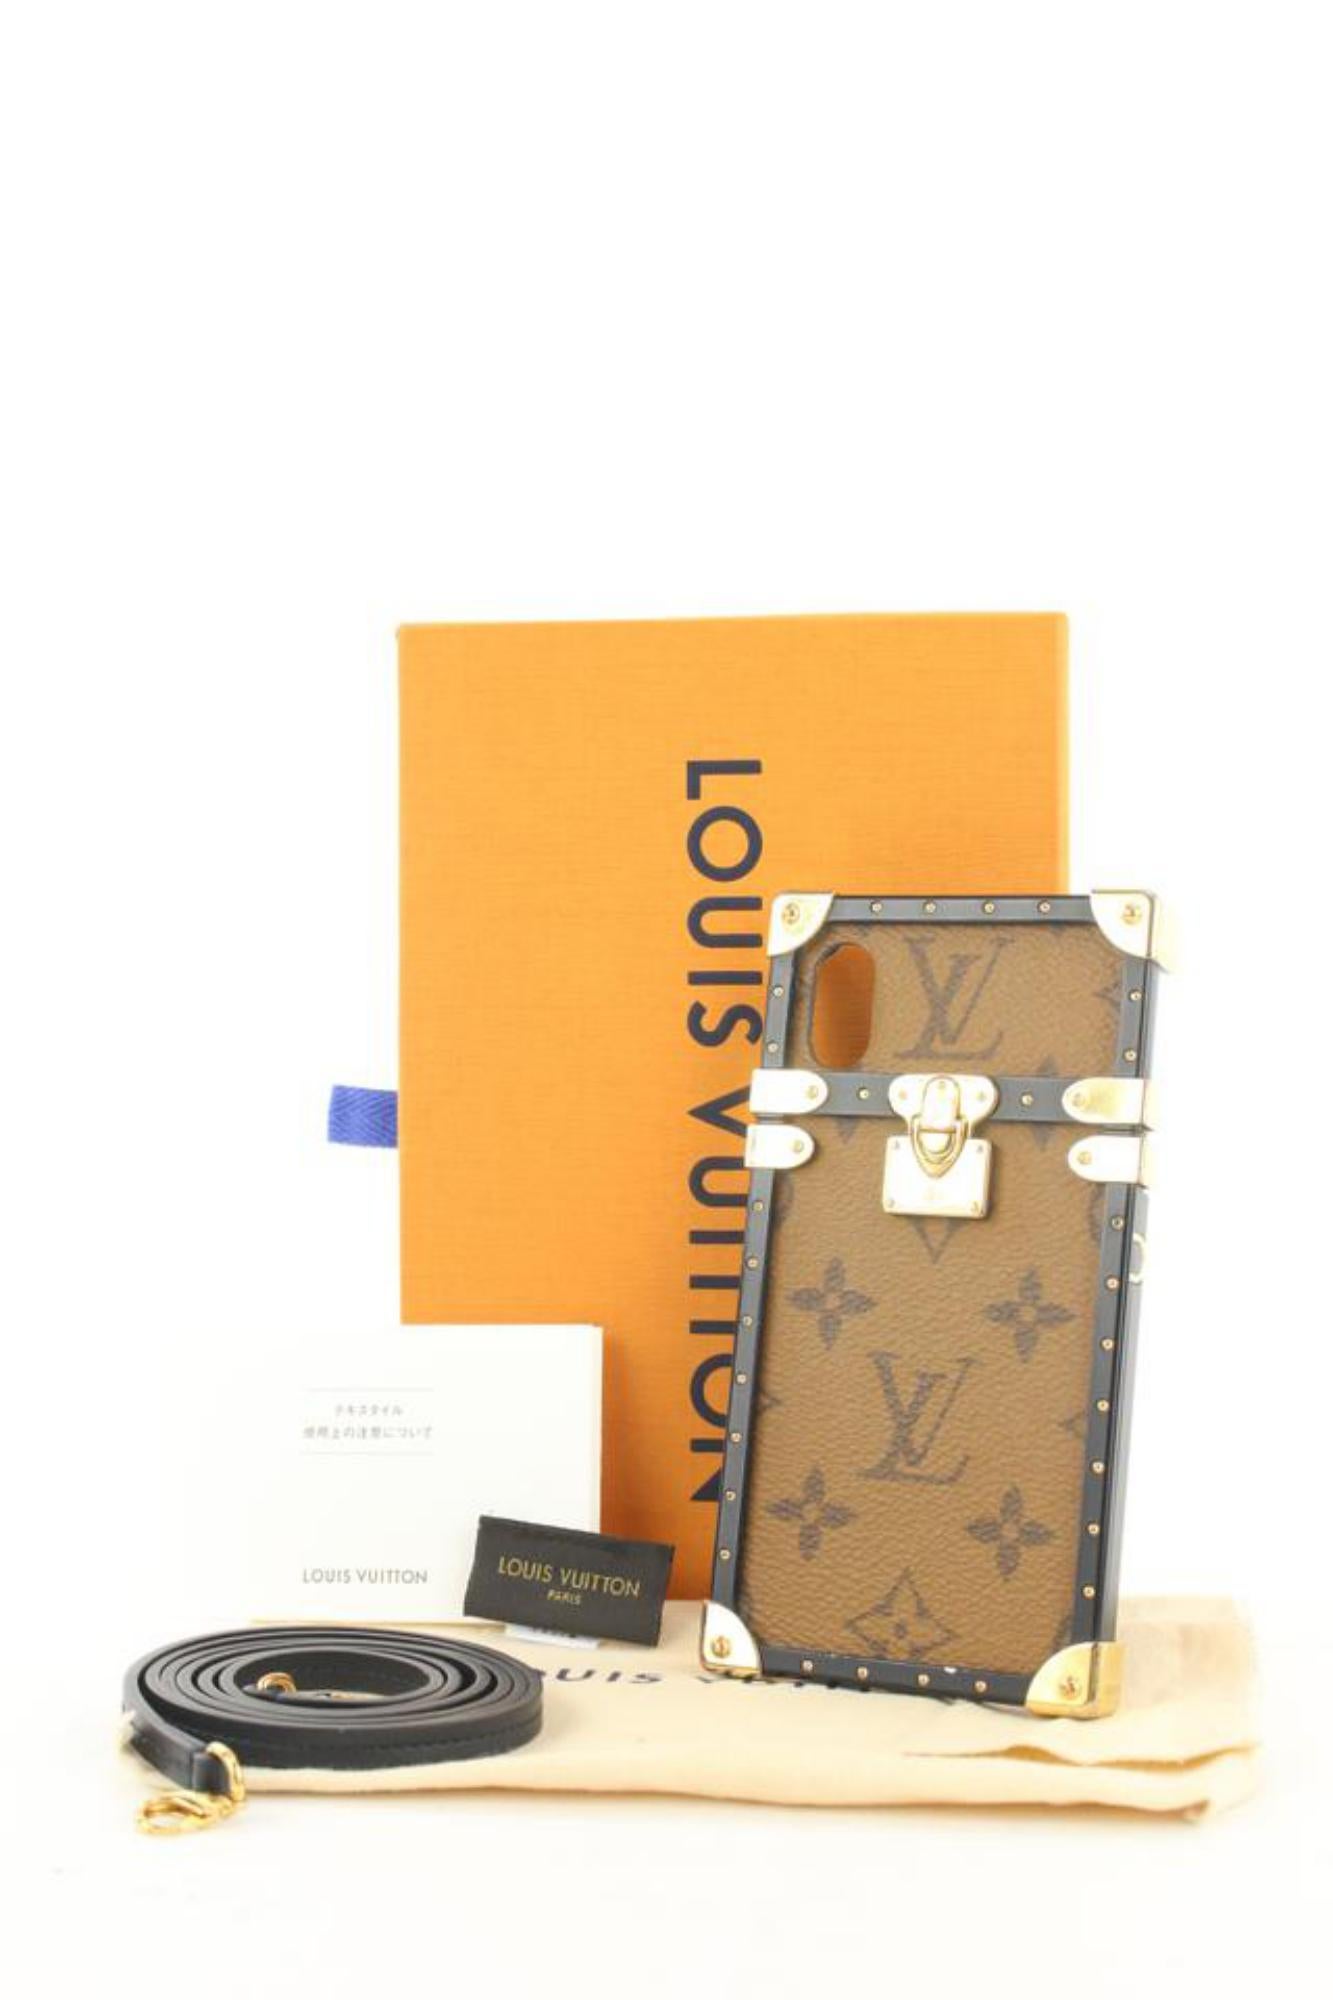 Louis Vuitton Monogram Reverse Eye Trunk iPhone X Xs Crossbody Phone Case 3V415La
Date Code/Serial Number: BC4197
Made In: Italy
Measurements: Length:  3